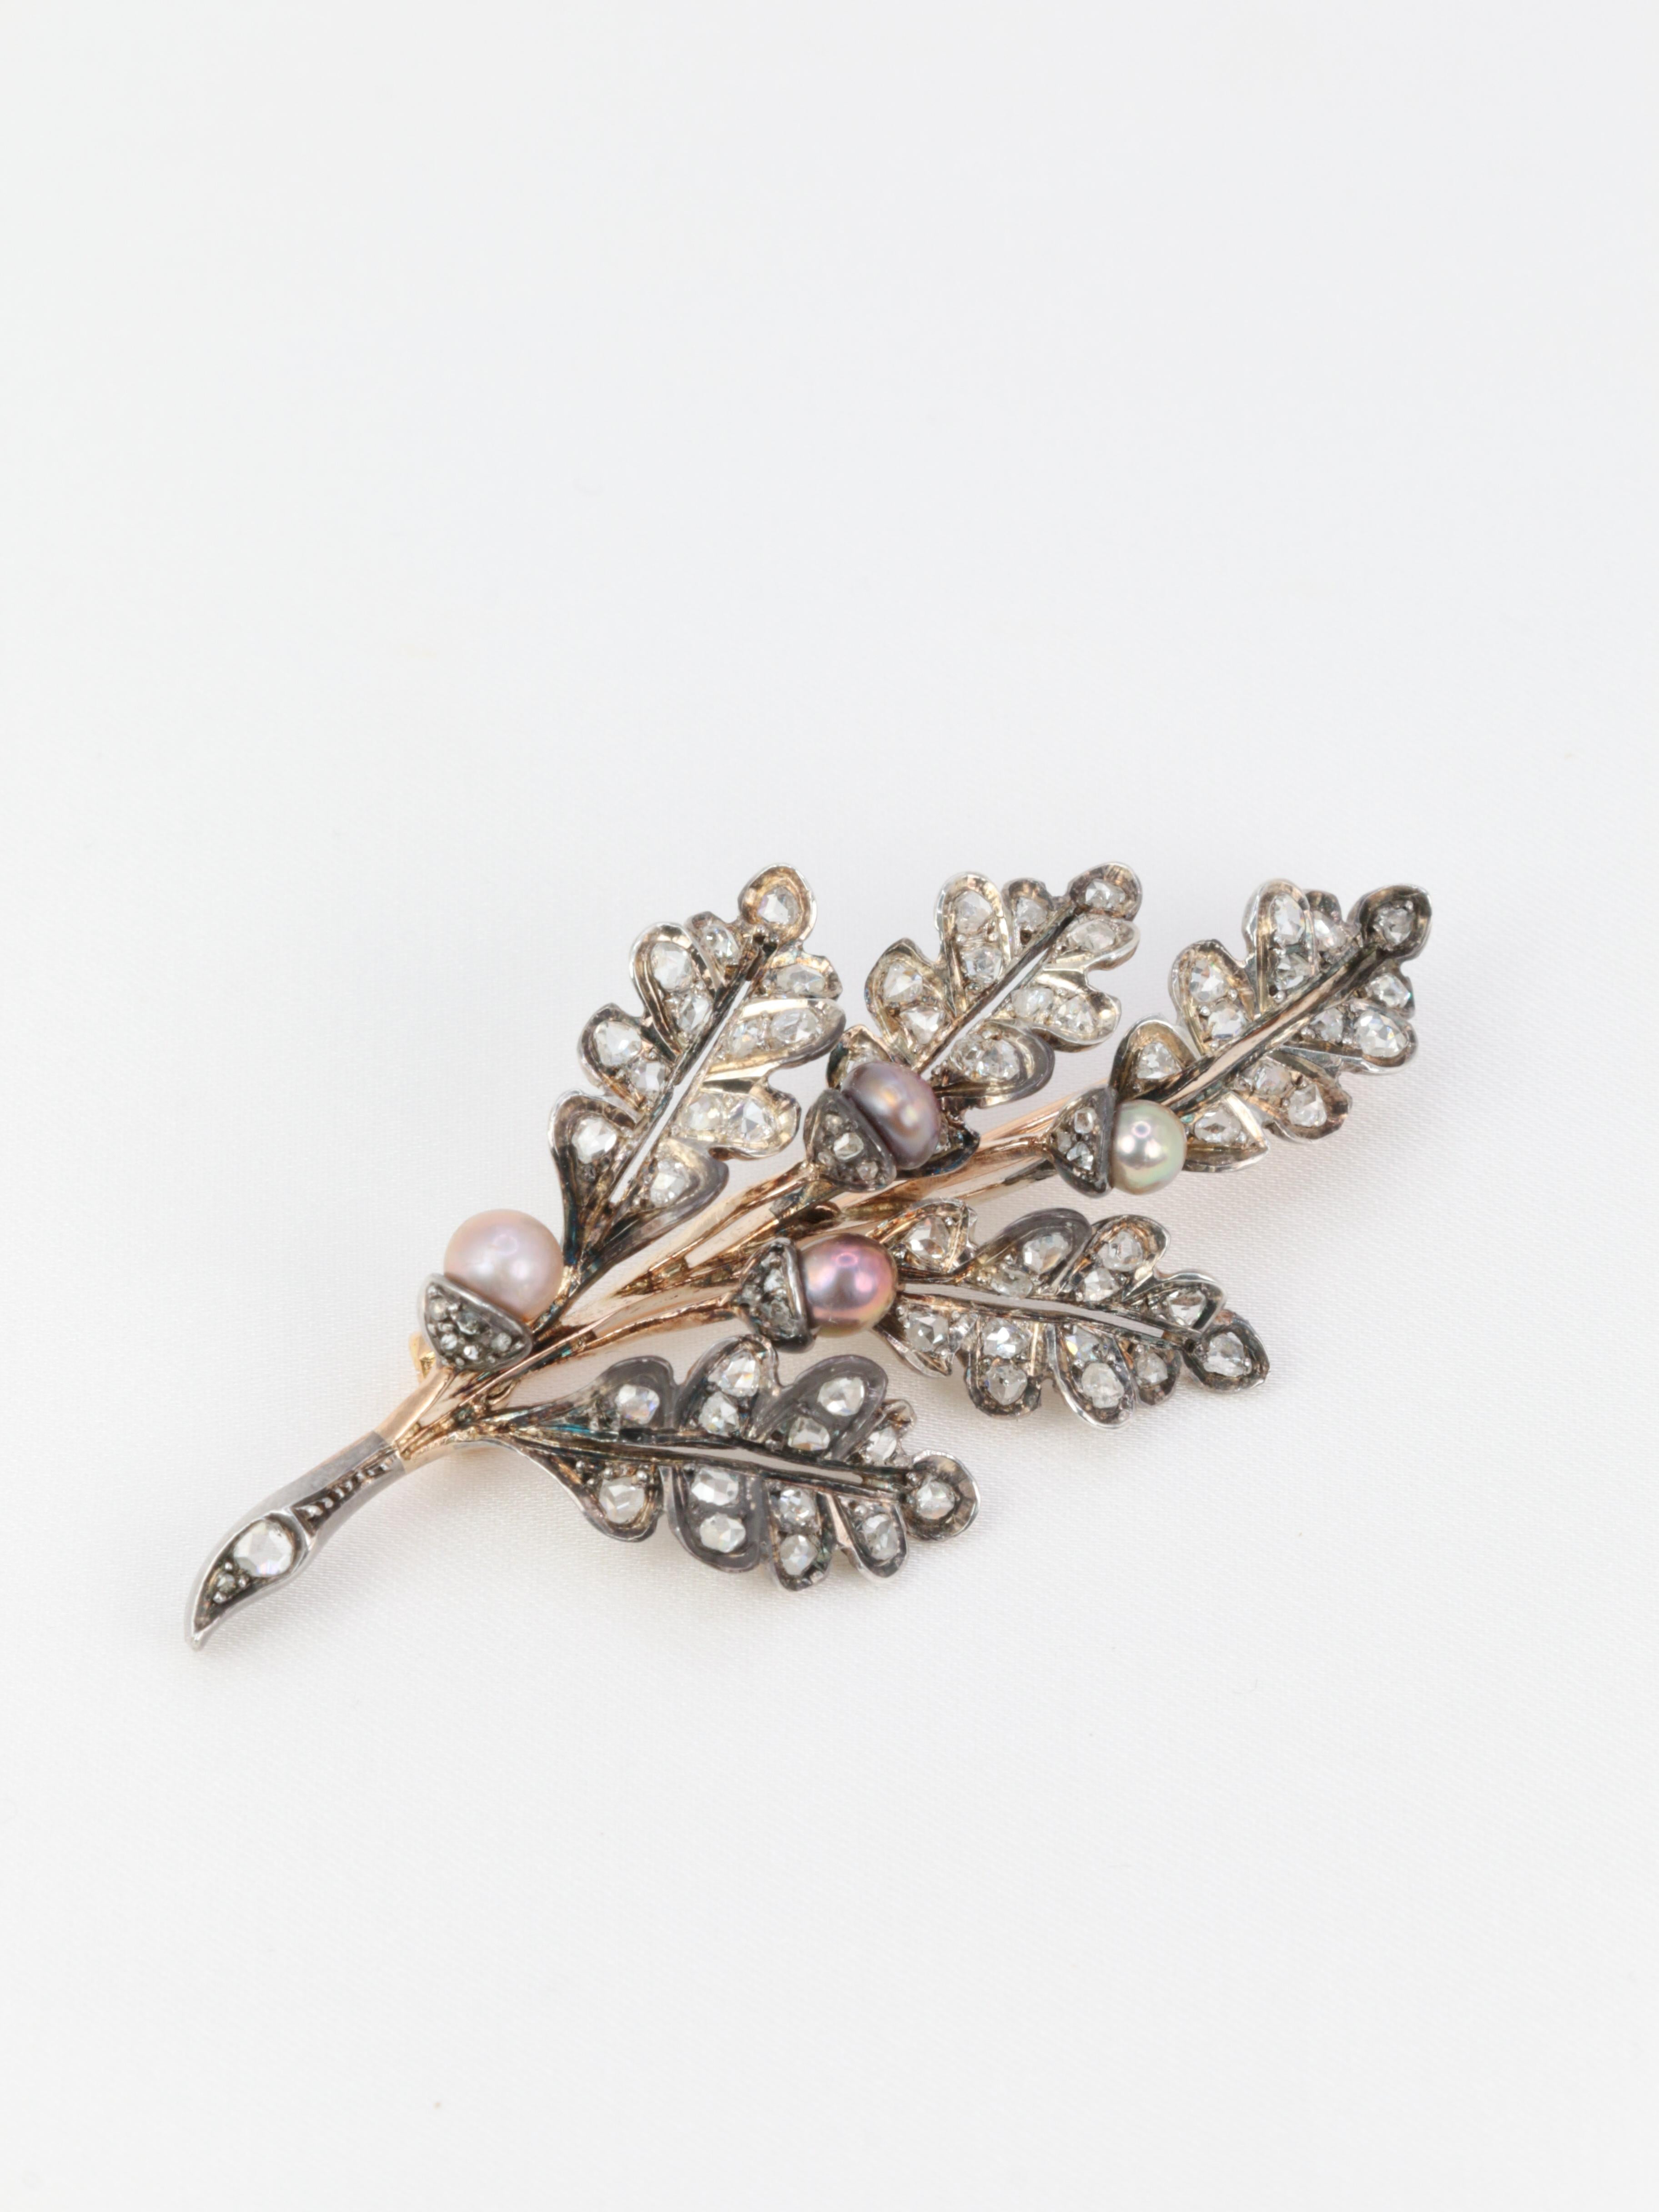 18Kt (750°/°°) gold leaf broochset with rose-cut diamonds and rare gray pearls of different shades.
Presence of a screw system to mount the jewel into a hairpin 
Very nice French work of the late 19th century 
Eagle head hallmark for 18Kt gold and